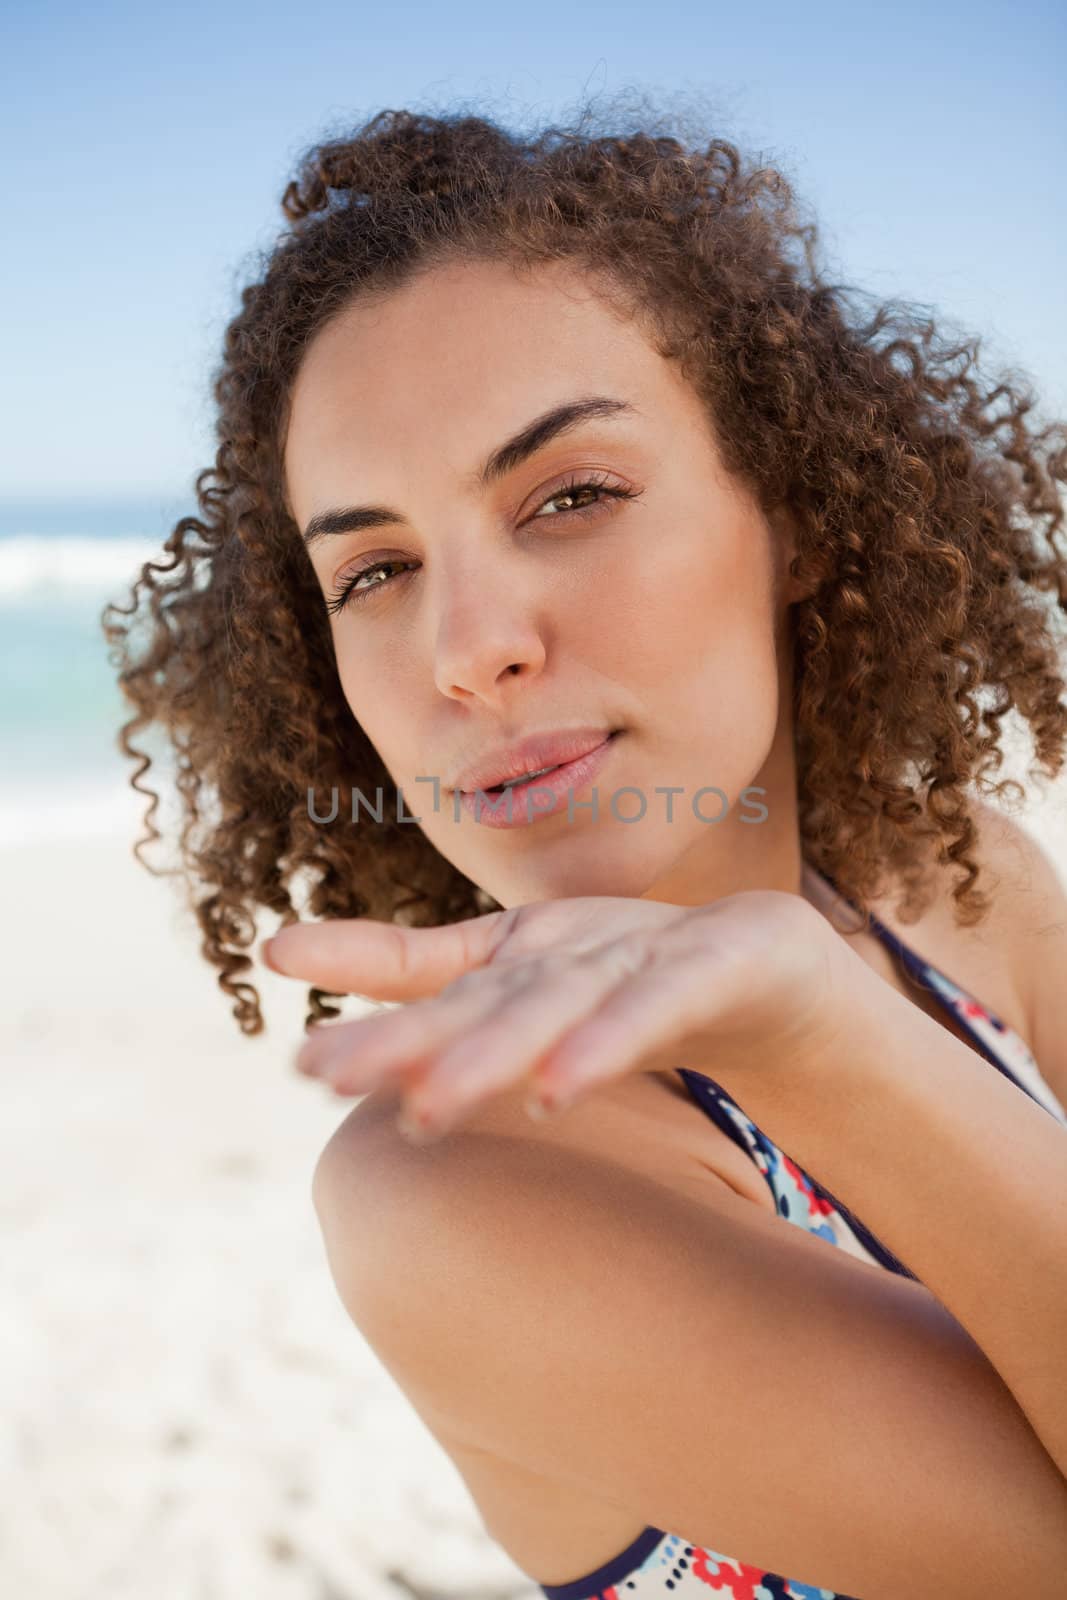 Young woman sending an air kiss while blowing on her hand by Wavebreakmedia